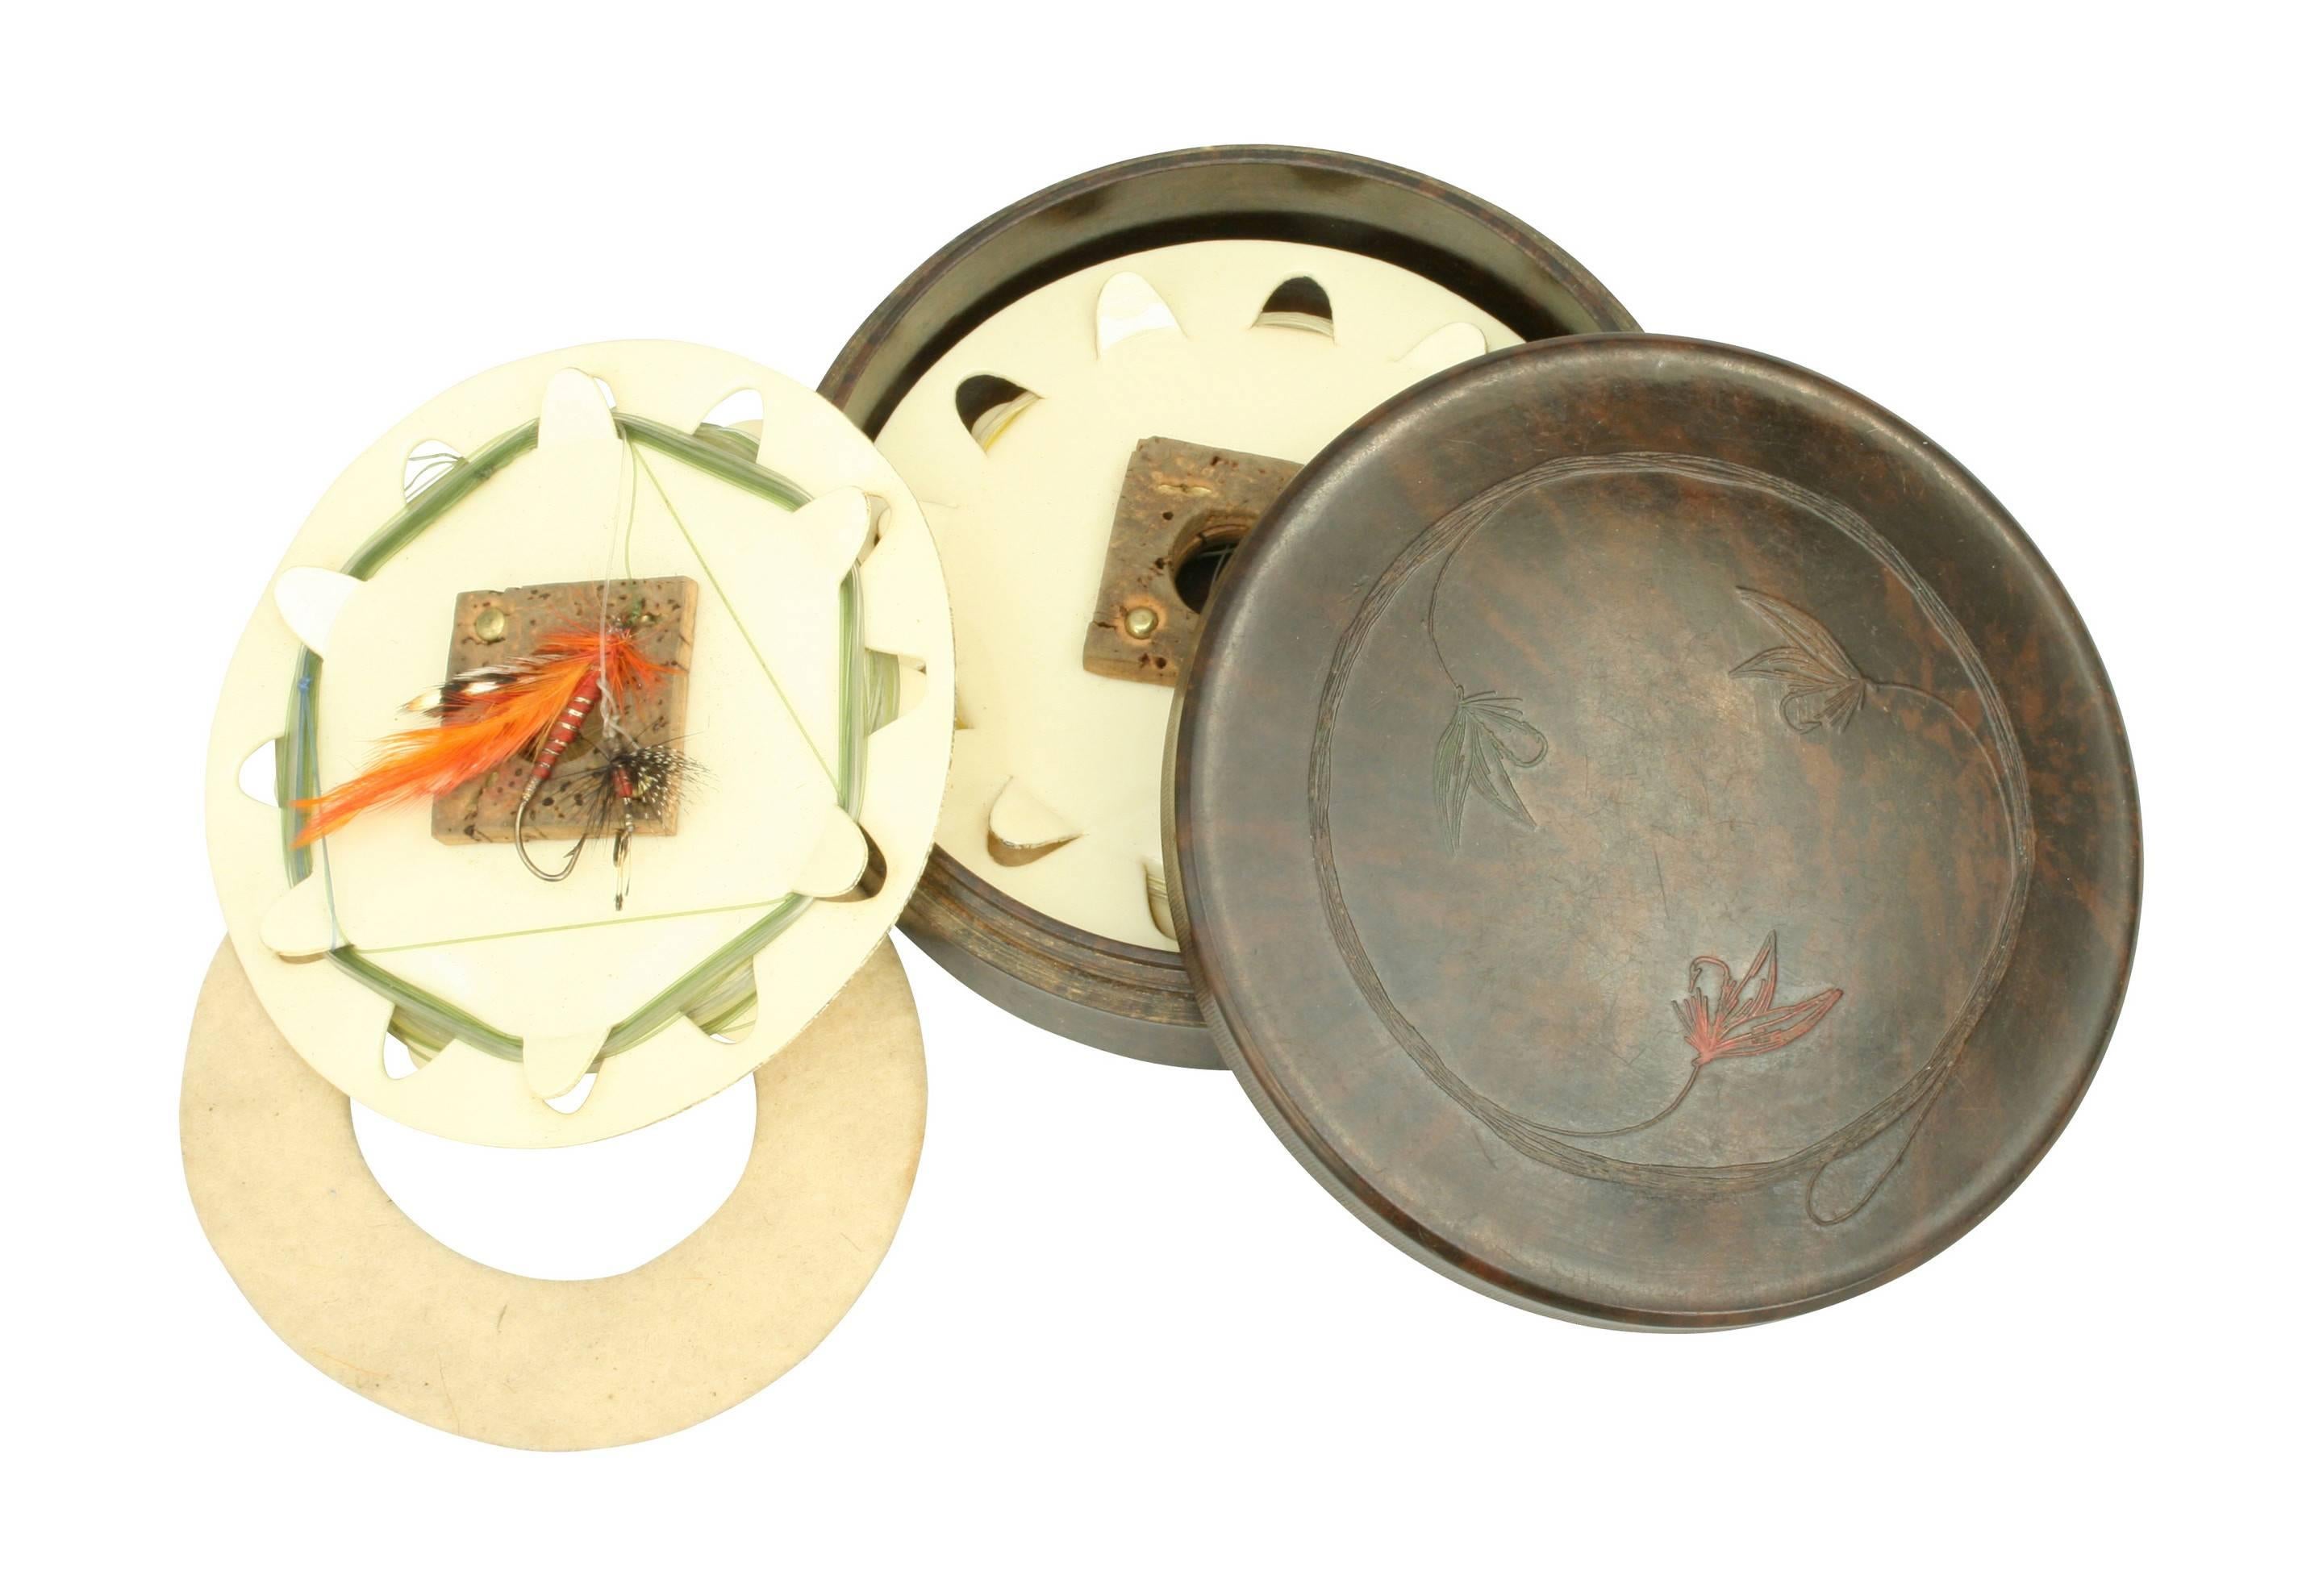 Hardy Neroda fly fishing cast box.
A round original Hardy Neroda fishing cast box made from Bakelite. The screw on lid is decorated with embossed flies on leaders. Hardy Bros made in England is stamped on the rear. The box contains two ivory white